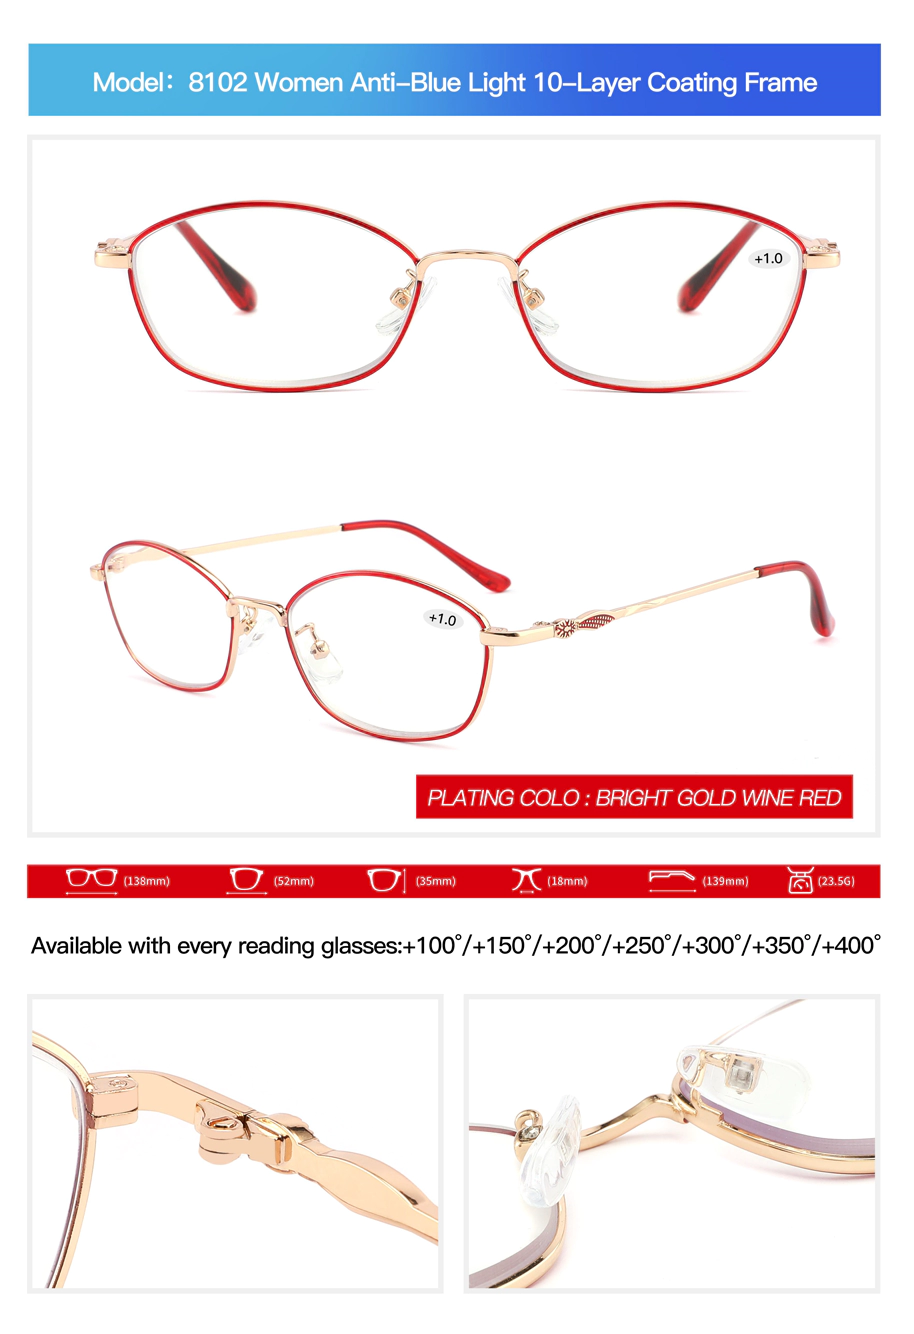 reading eyeglass, Model 8102, anti-blue light, 10-layer coating, metal, dimensions, Available degree, detail shooting, red, gold, Laser pattern